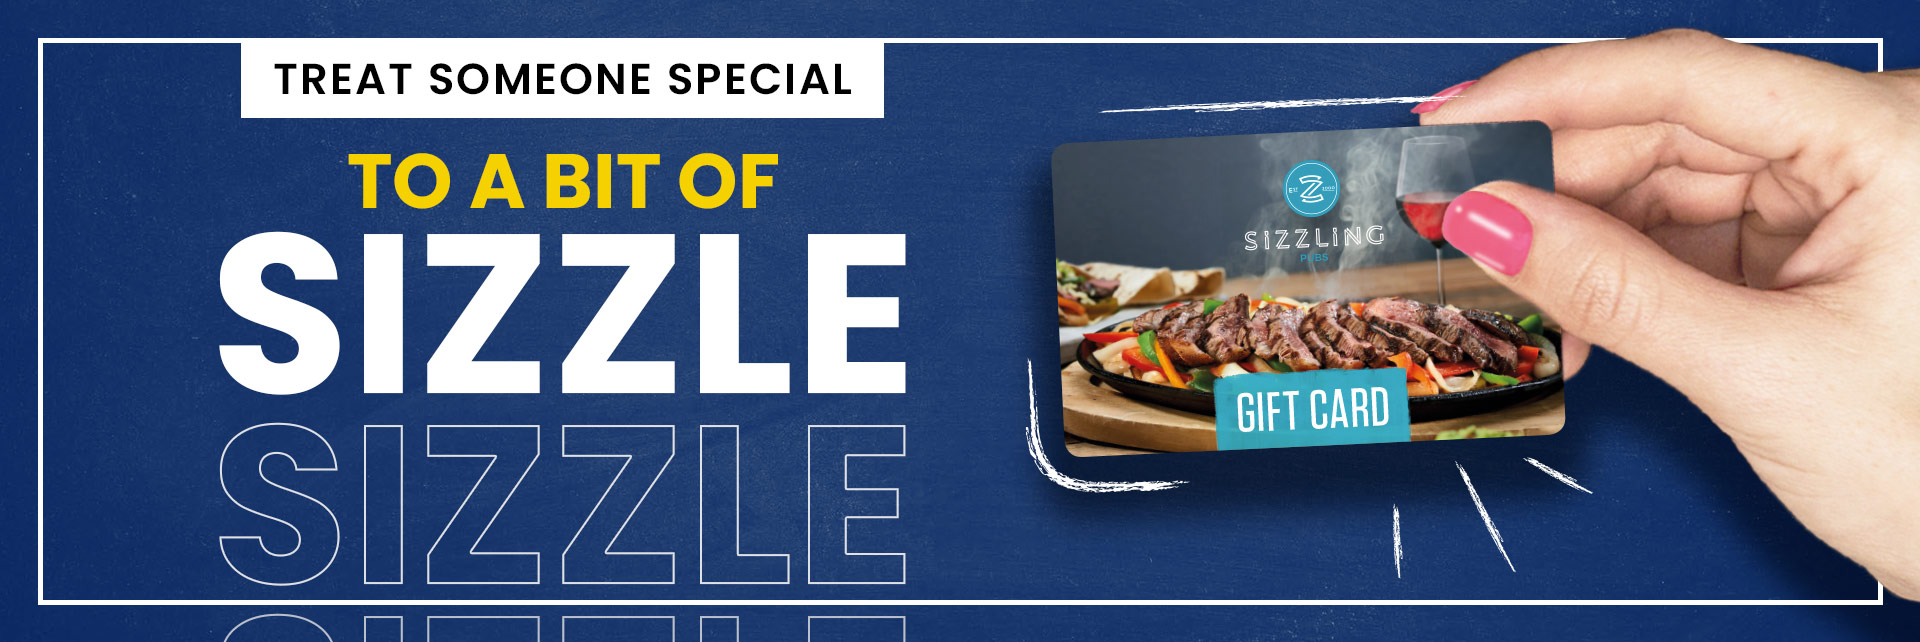 Sizzling Pubs Gift Card at The Myvod in Wednesbury